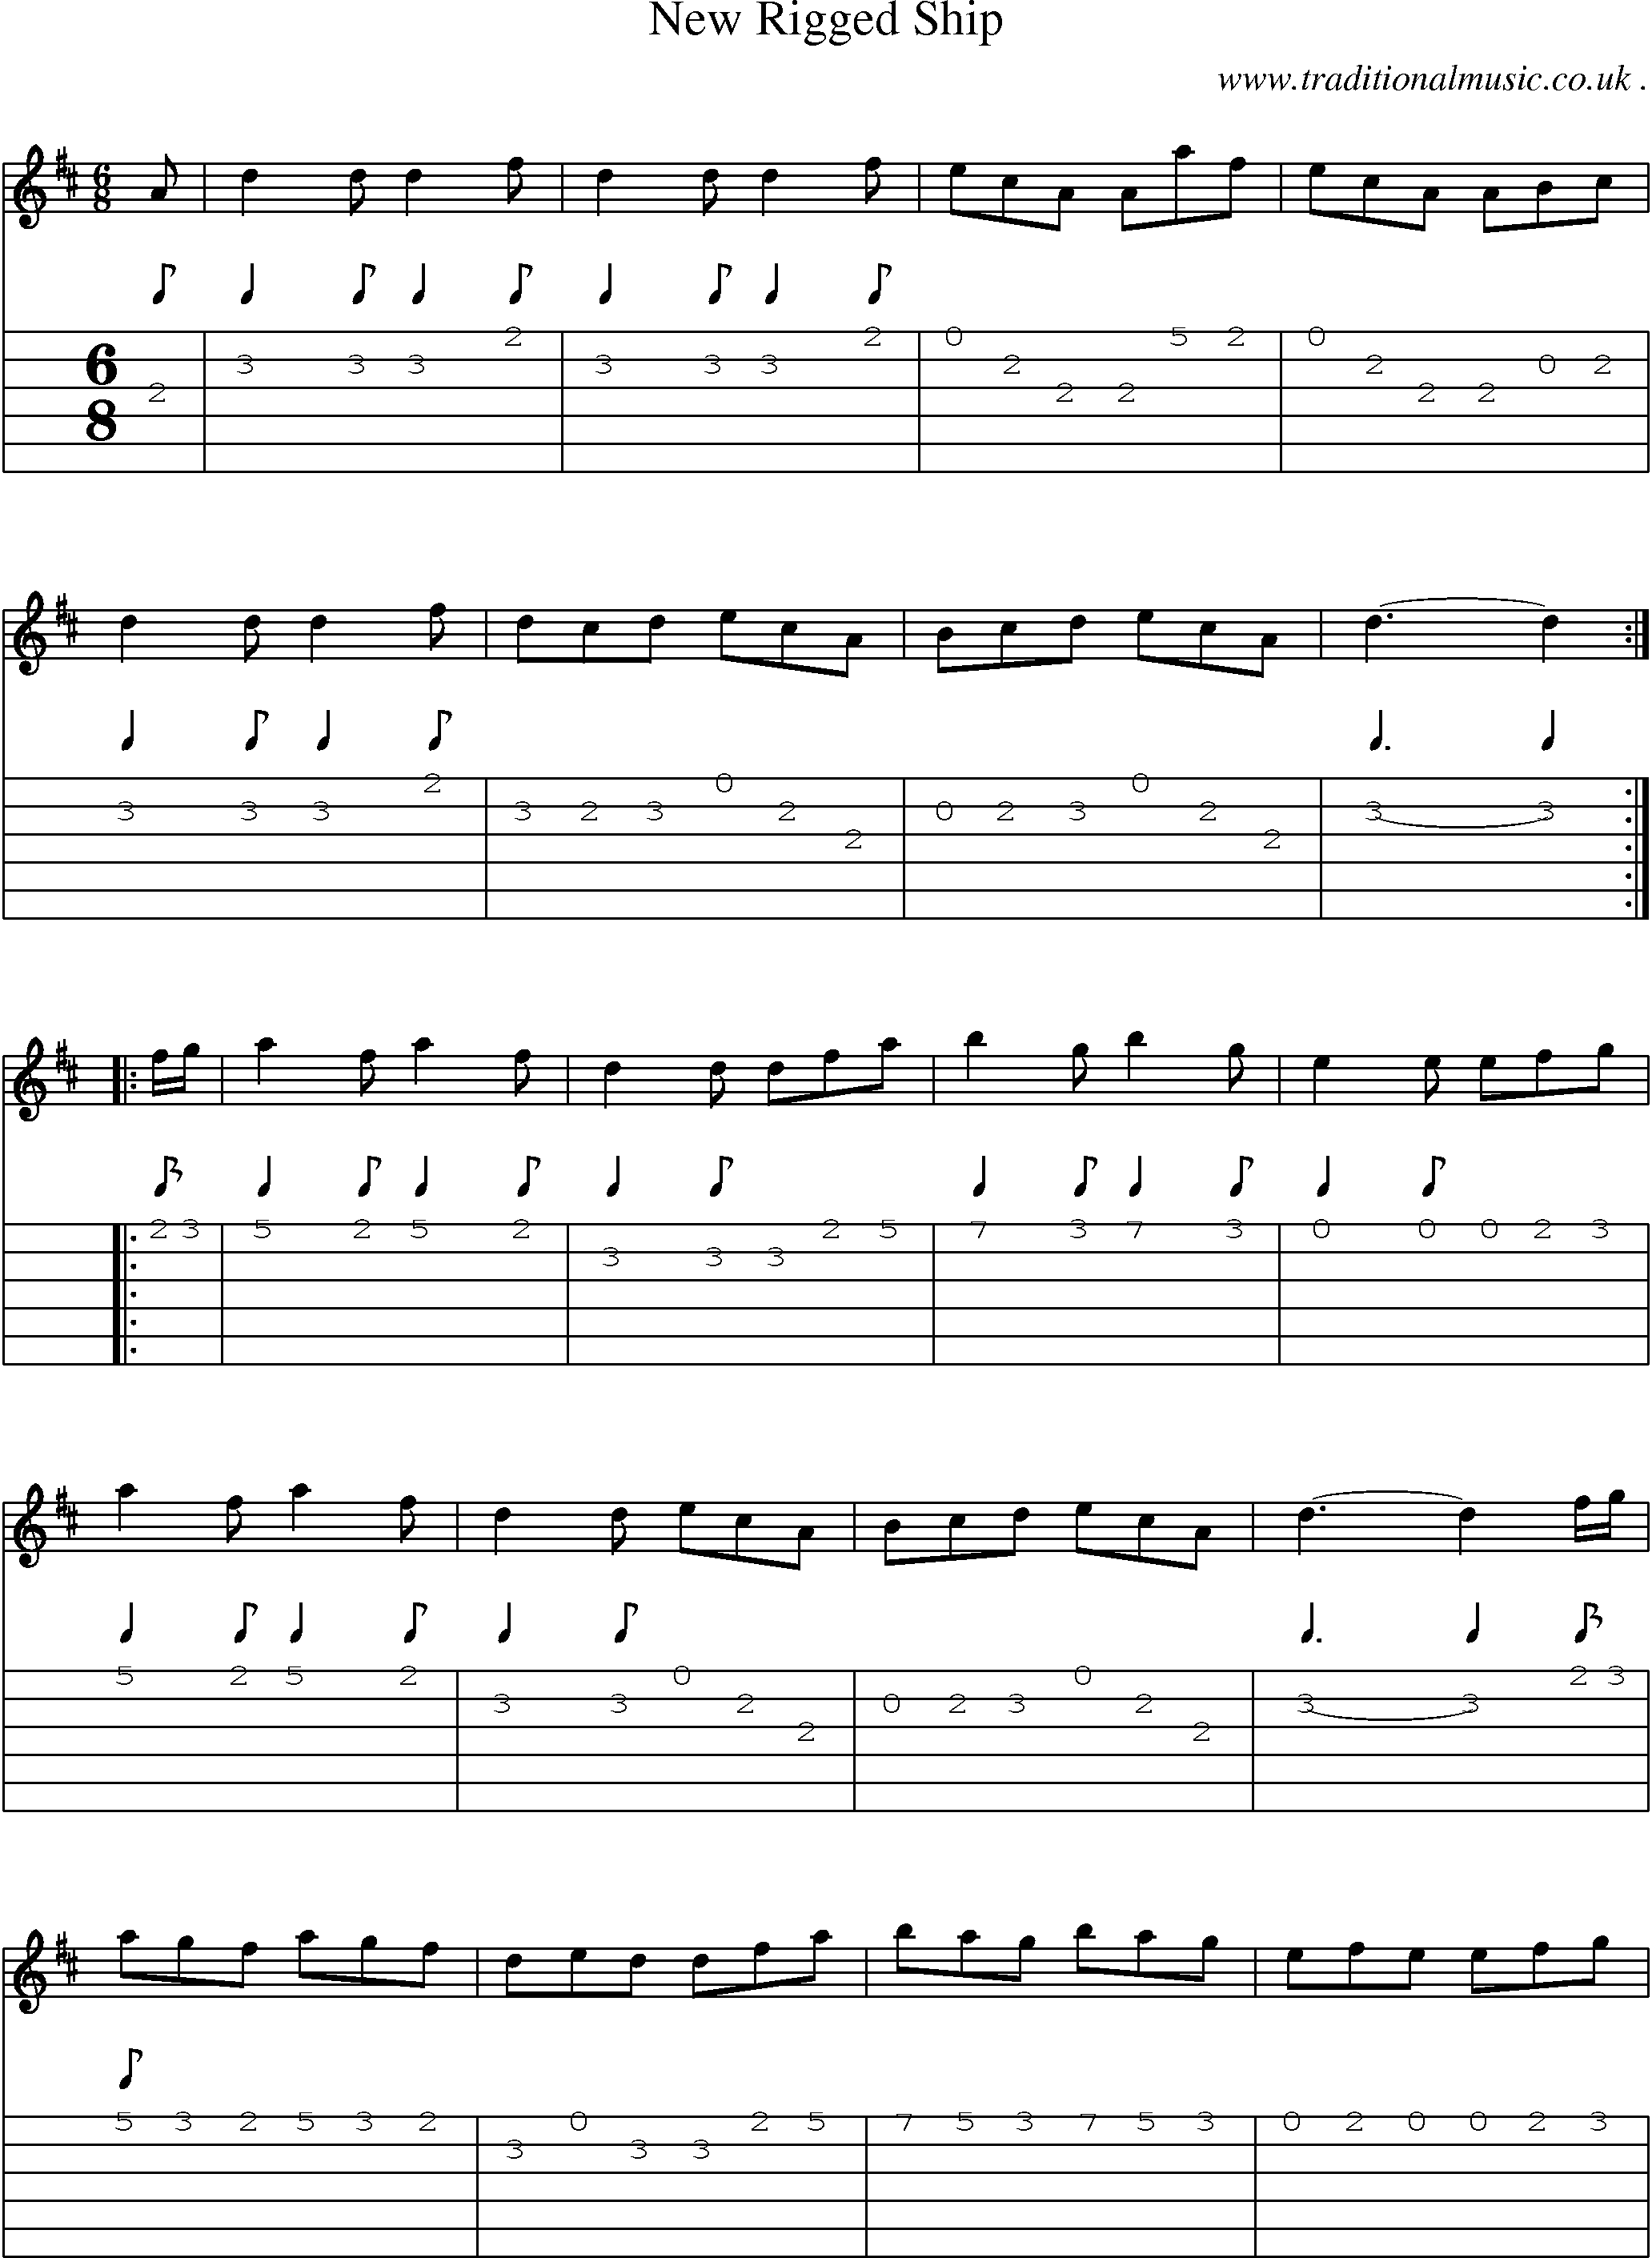 Sheet-Music and Guitar Tabs for New Rigged Ship